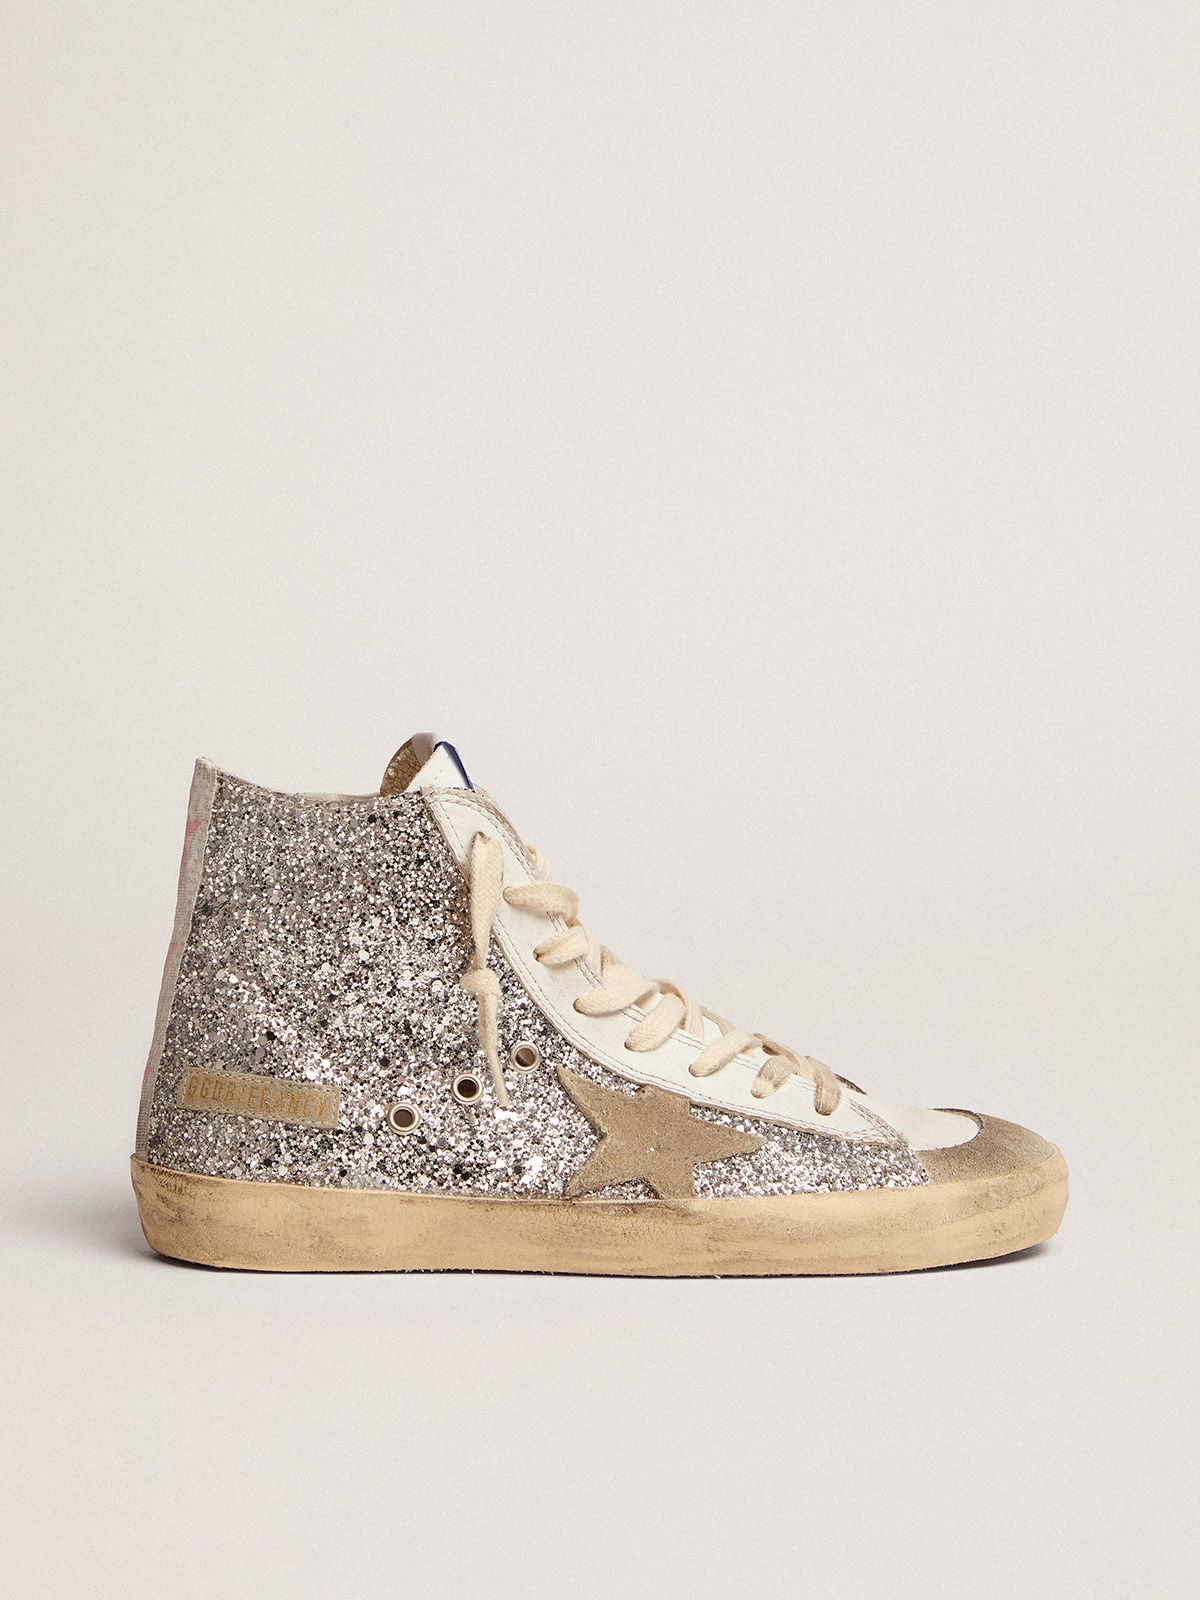 Golden Goose Uomo Saldi Penstar Francy sneakers with silver glitter upper and ice-gray suede star